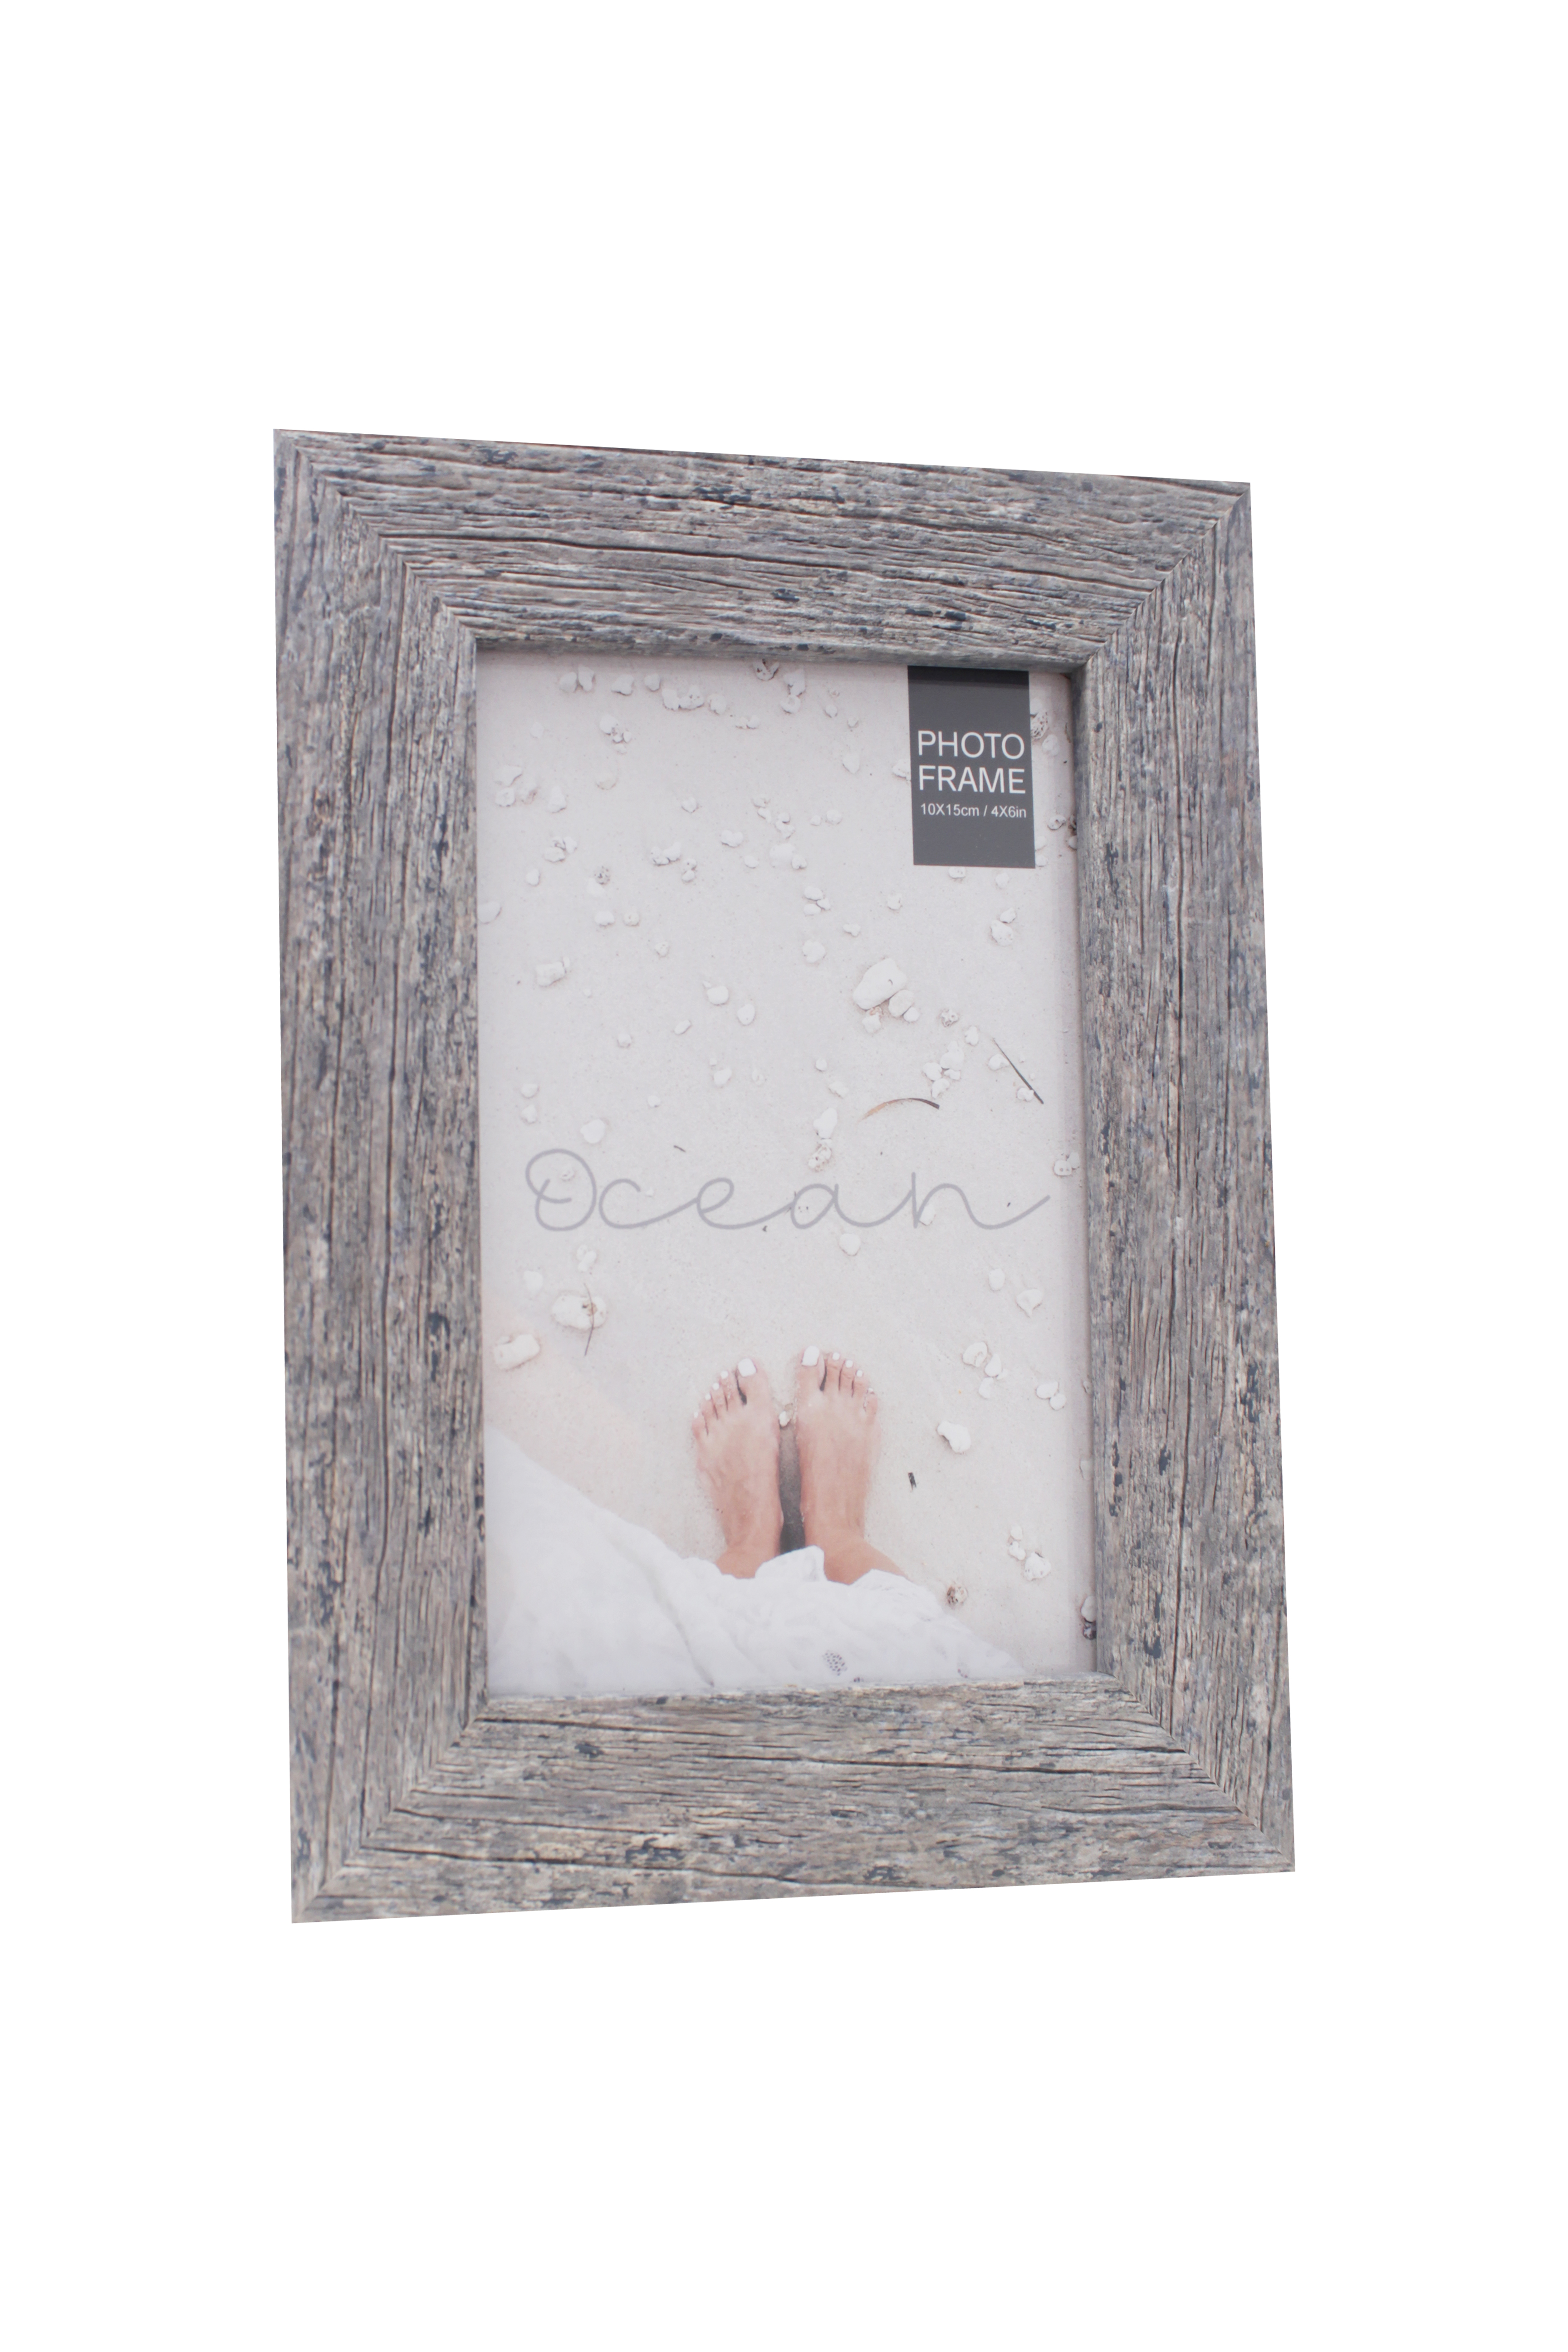 PHOTO FRAME 10 X 15CM ASSORTED COLORS